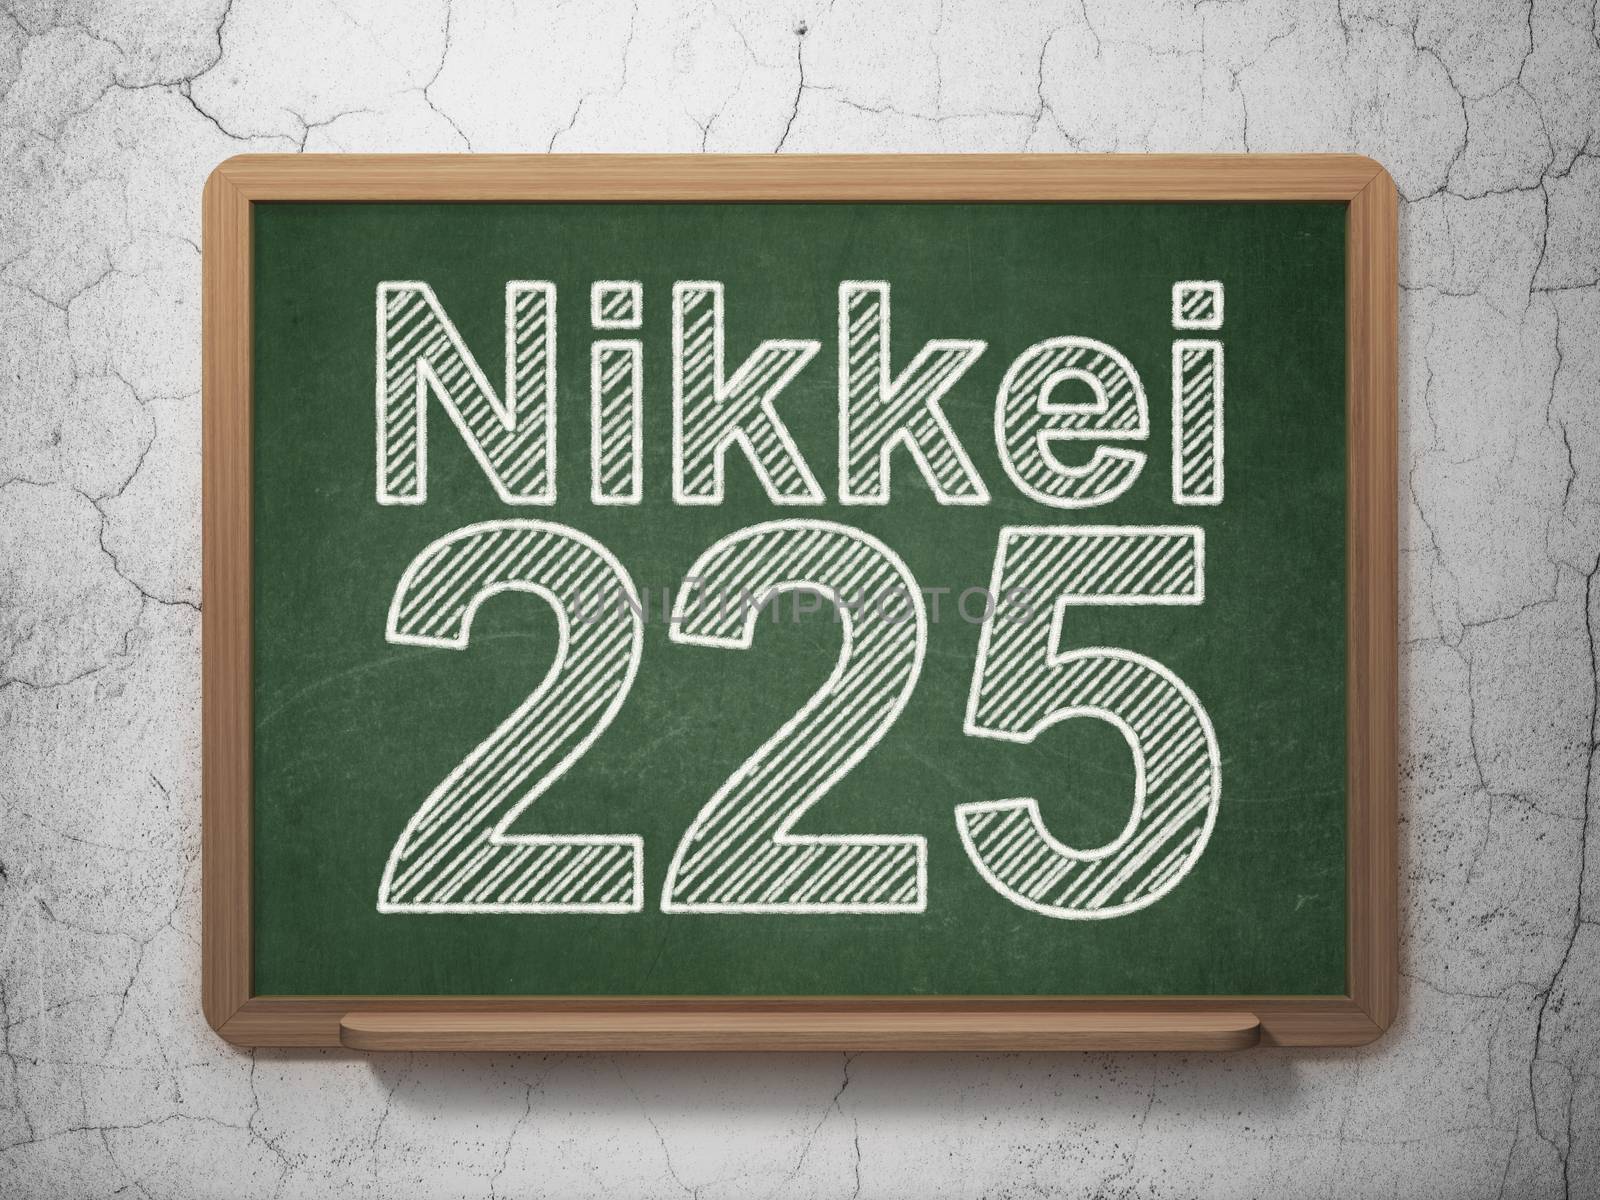 Stock market indexes concept: text Nikkei 225 on Green chalkboard on grunge wall background, 3D rendering